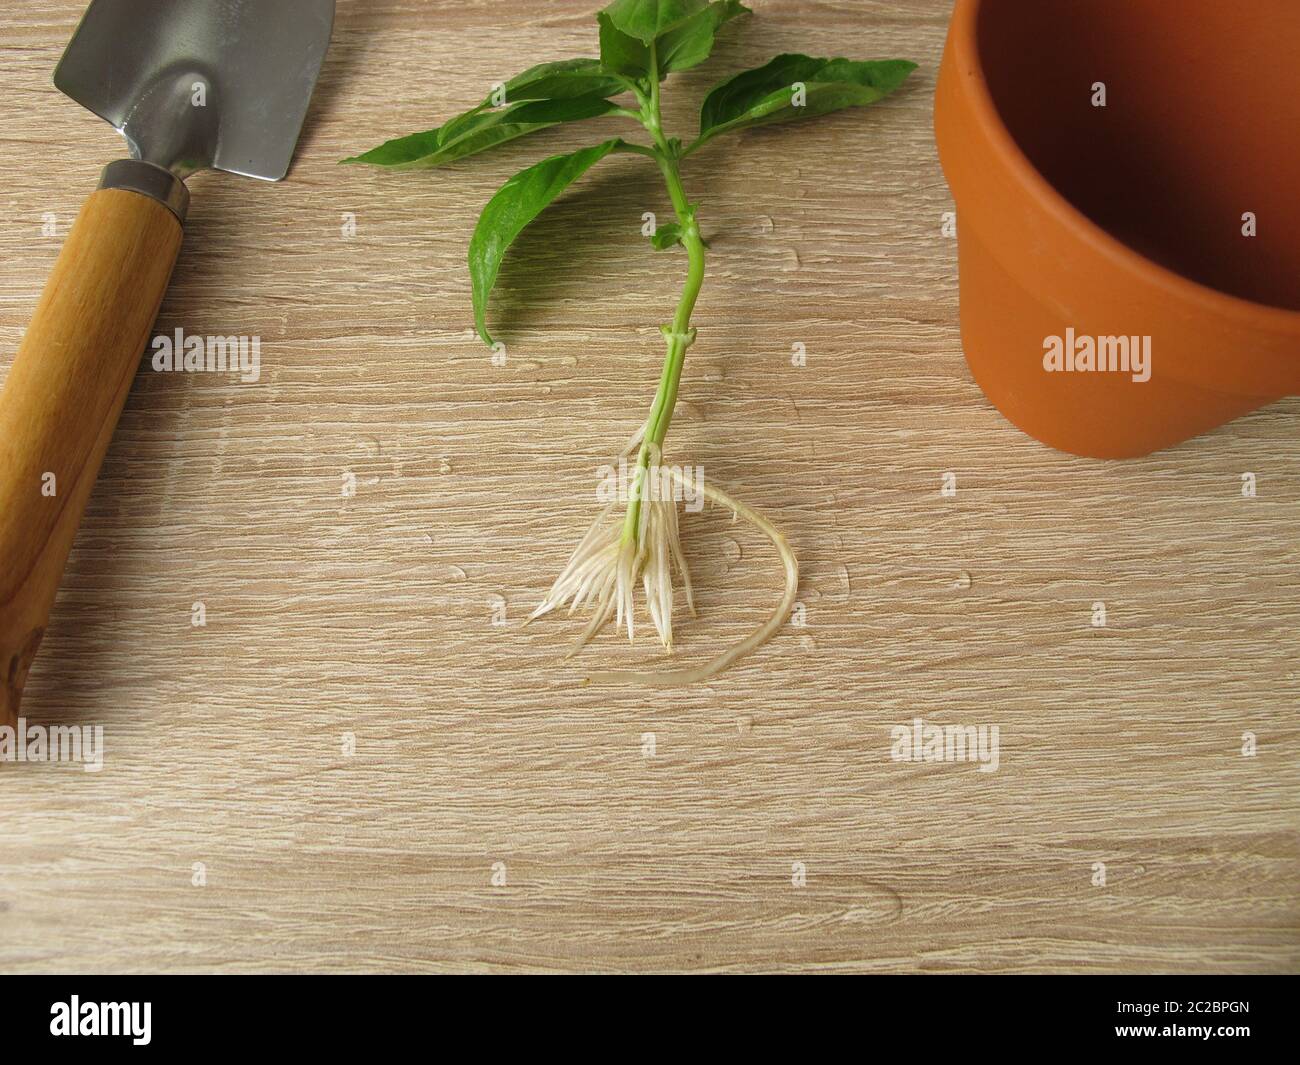 Basil shoot with roots for regrow herbs Stock Photo